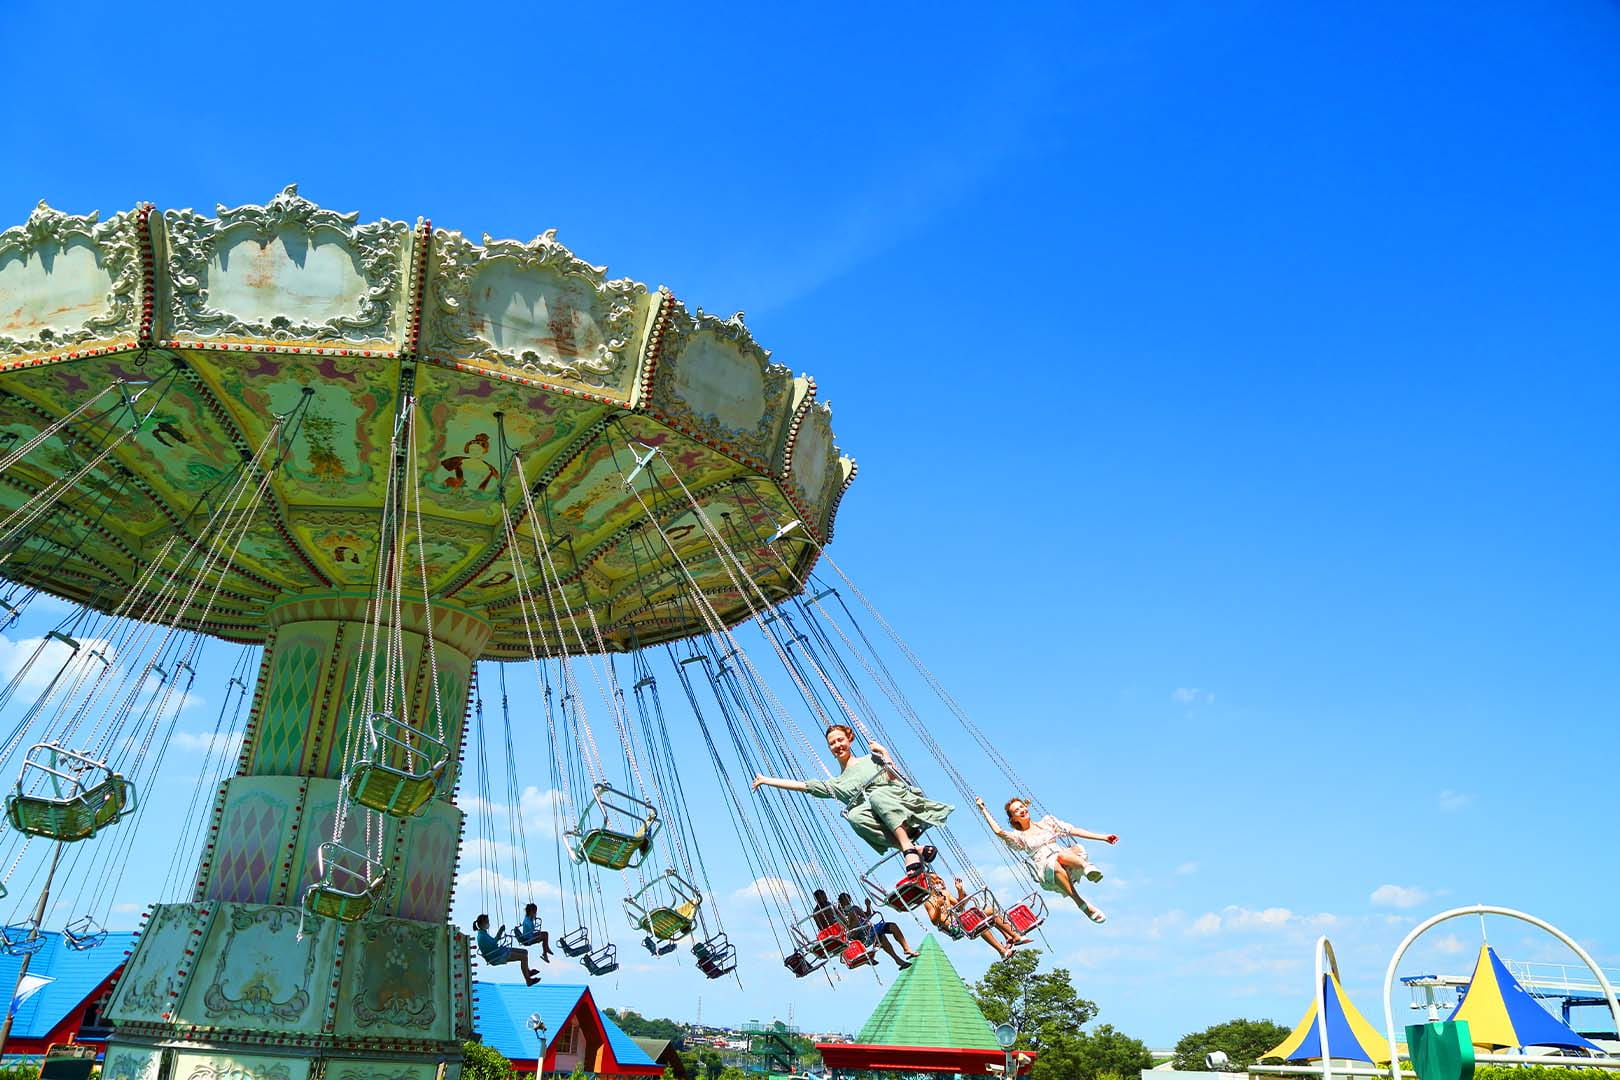 Take a Spin on the Swing Ride and Journey to a Magical World!